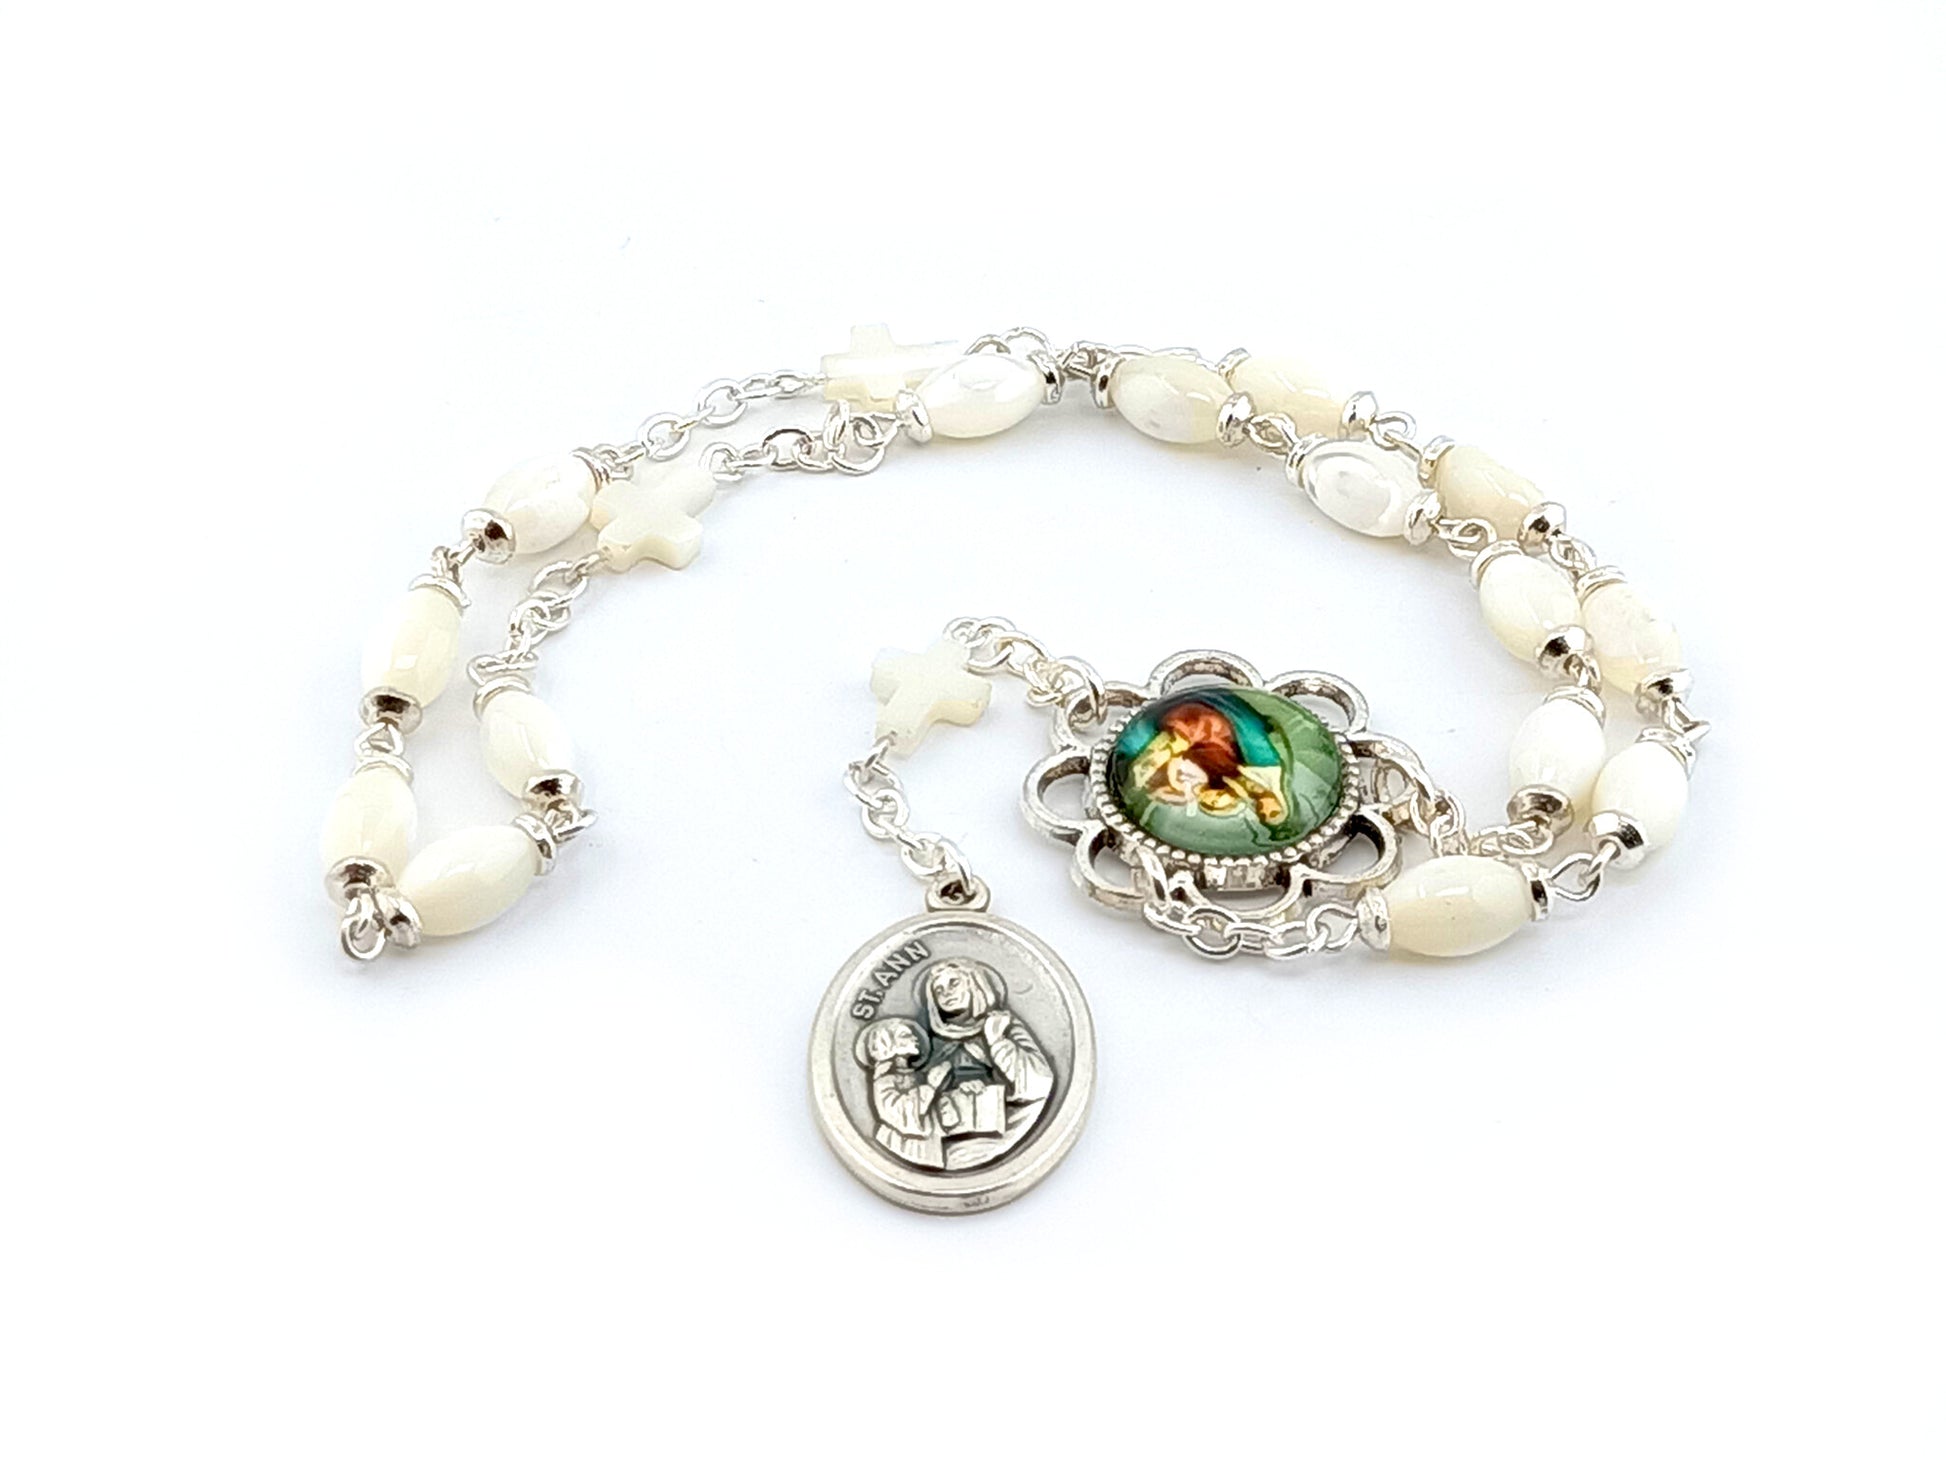 Saint Anne unique rosary beads prayer chaplet with mother of pearl rice and cross beads and silver picture centre medal.